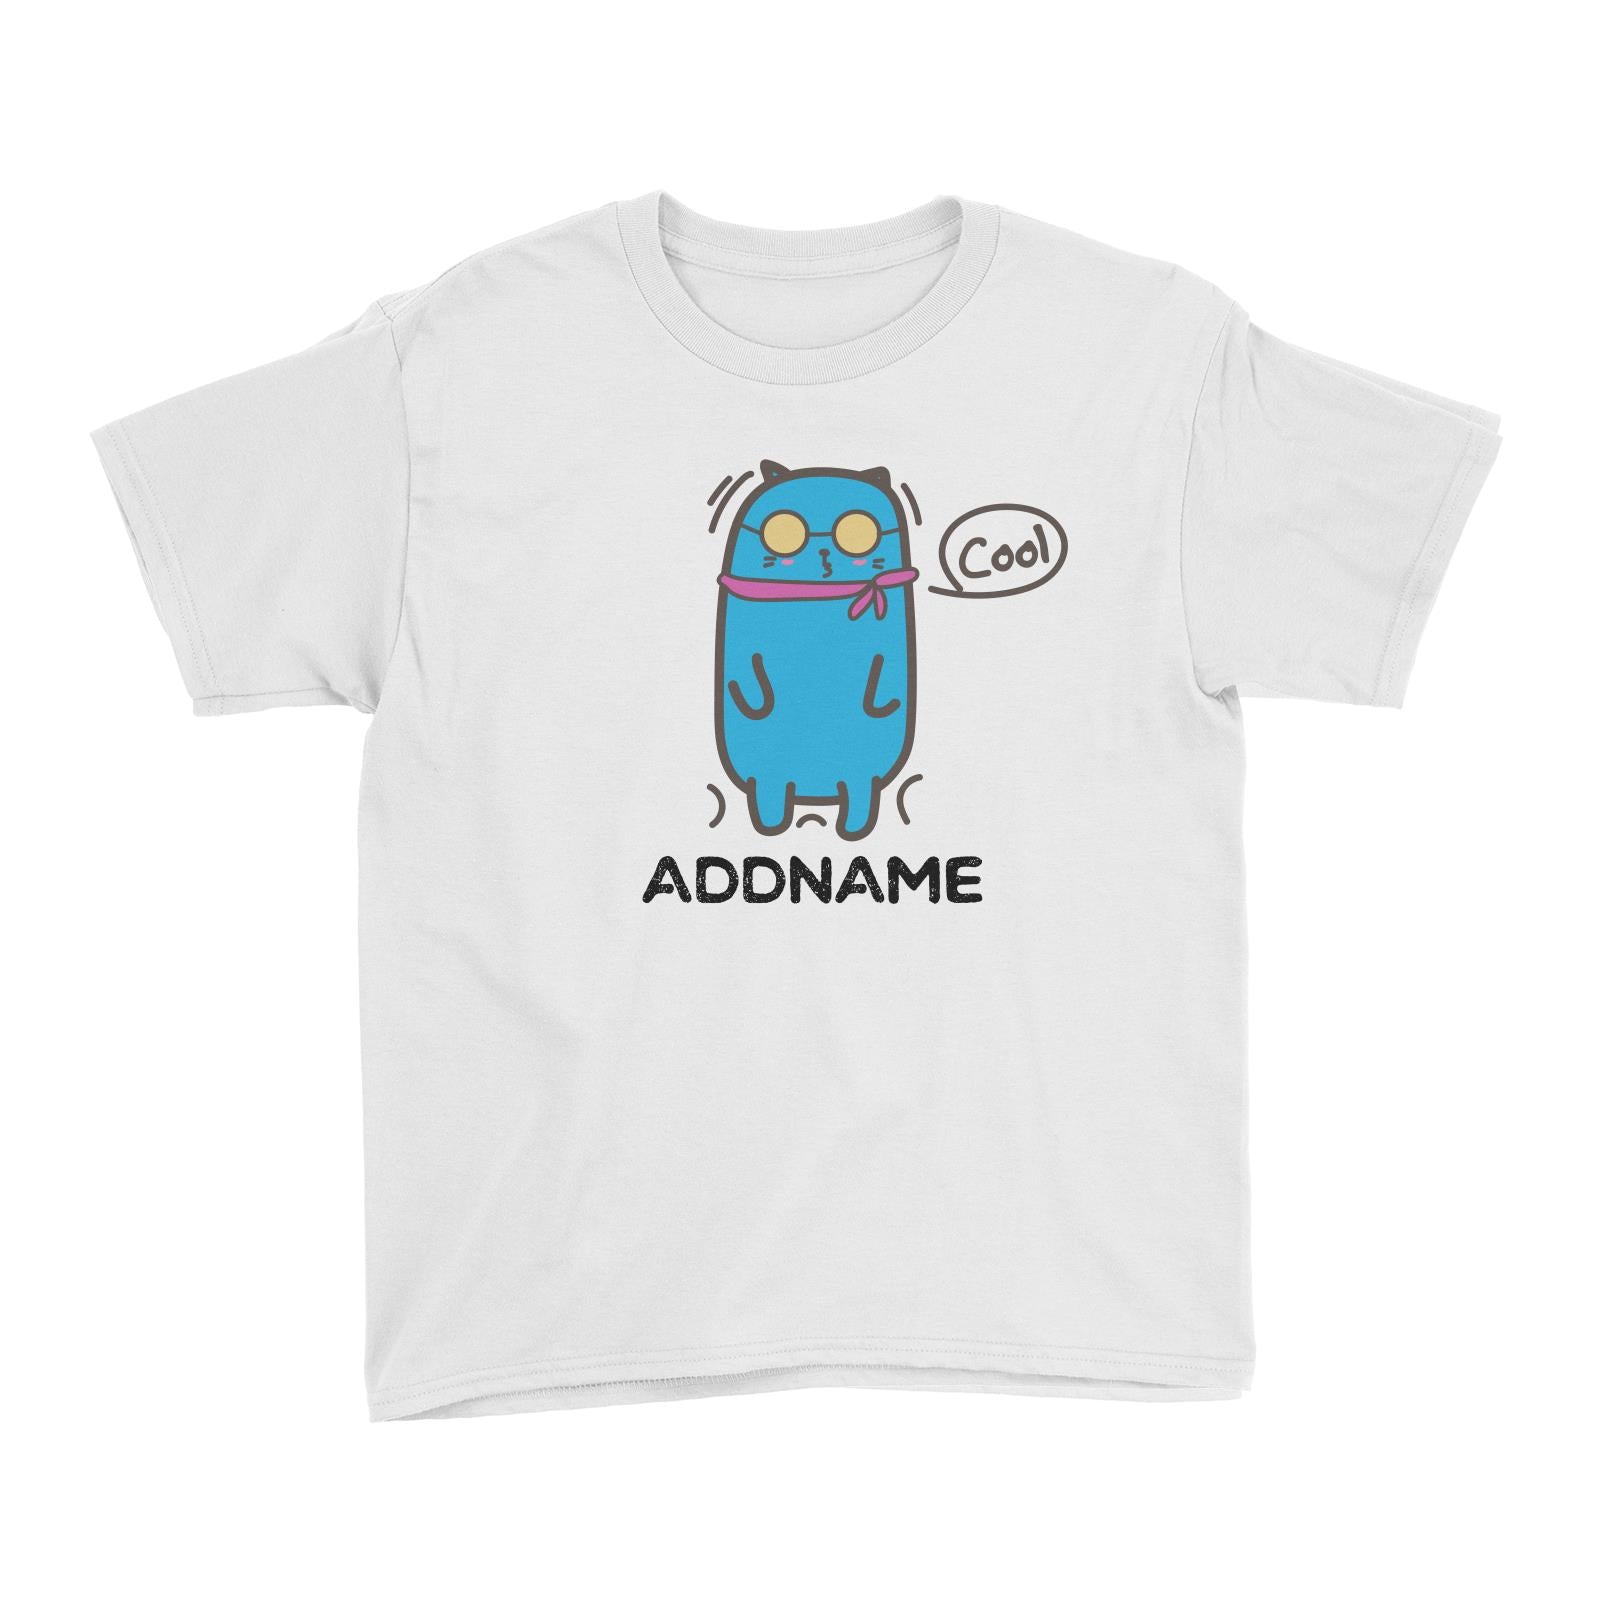 Cute Animals And Friends Series Cool Blue Cat With Sunglasses Addname Kid's T-Shirt